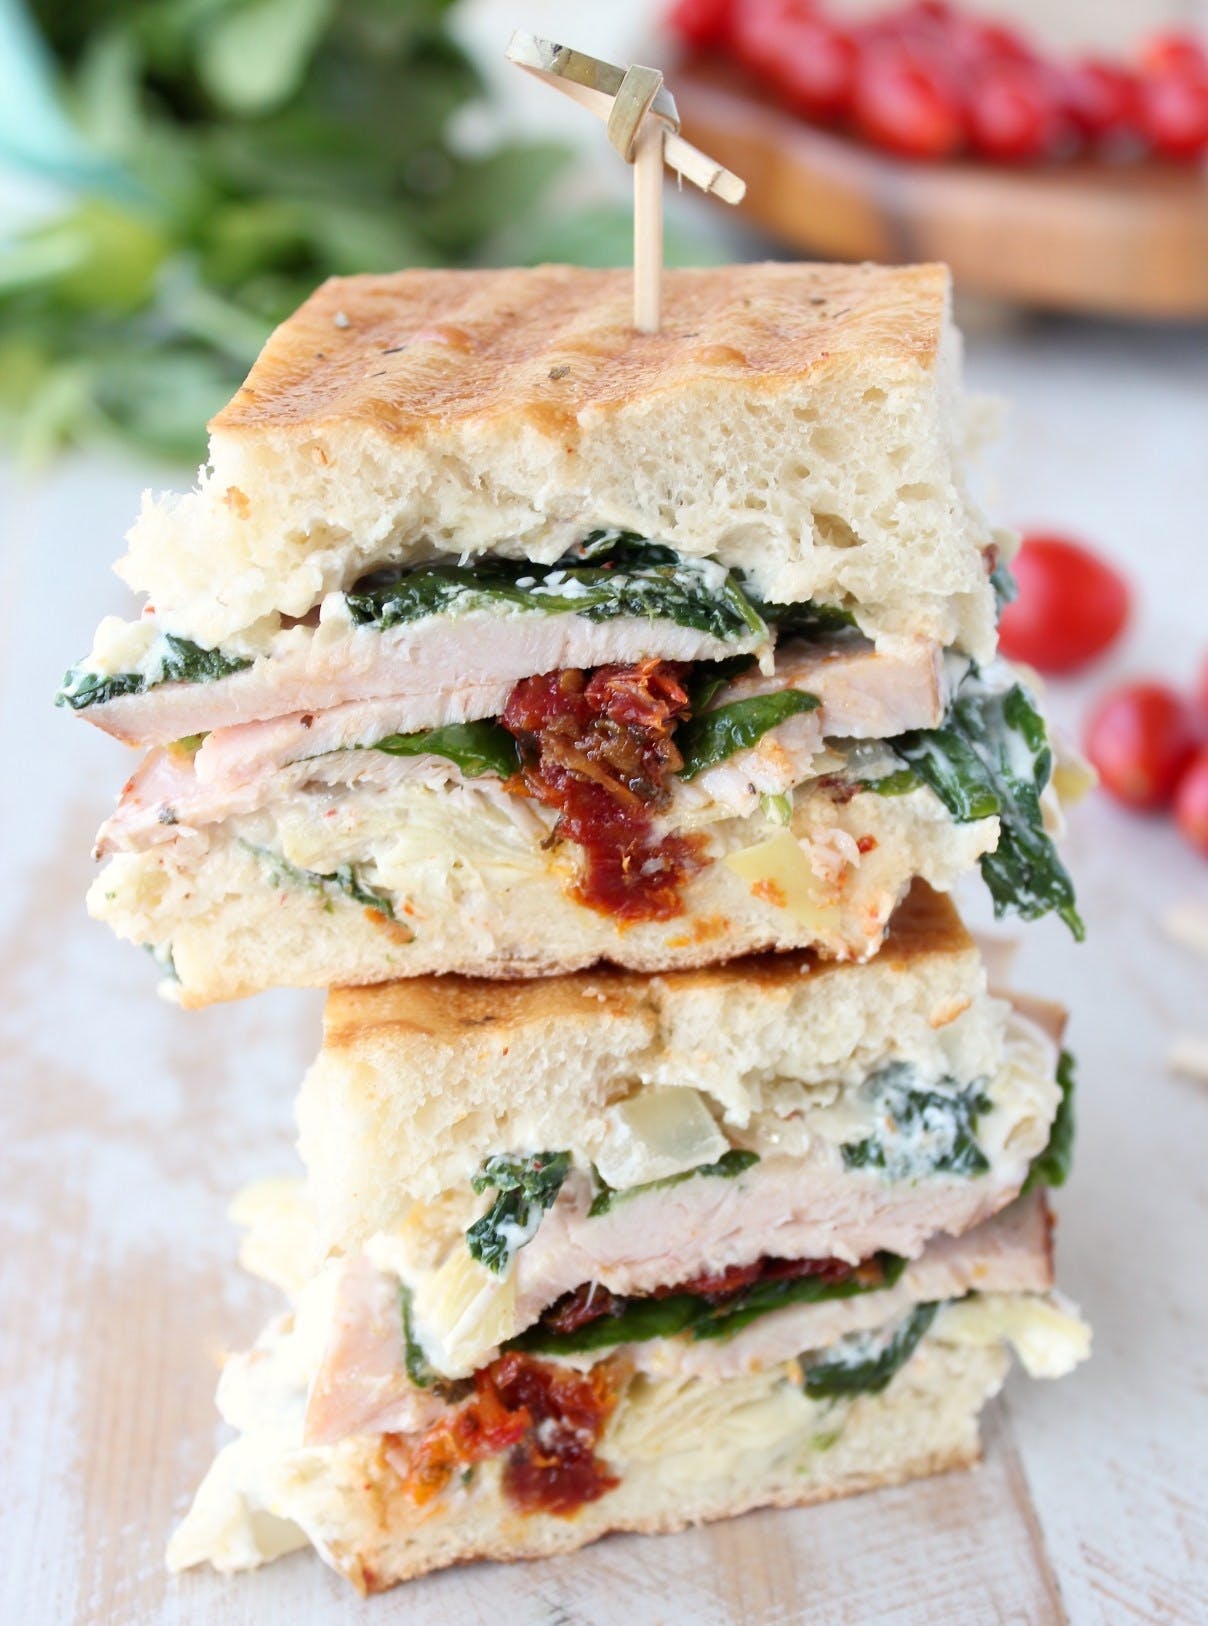 This panini is packed with fresh turkey, spinach-artichoke dip, and sun-dried tomatoes. Buy pre-made dip and already sliced turkey, and lunch basically makes itself. (via <strong><a href="https://whitneybond.com/spinach-artichoke-turkey-panini/">Whitney Bond</a></strong>)